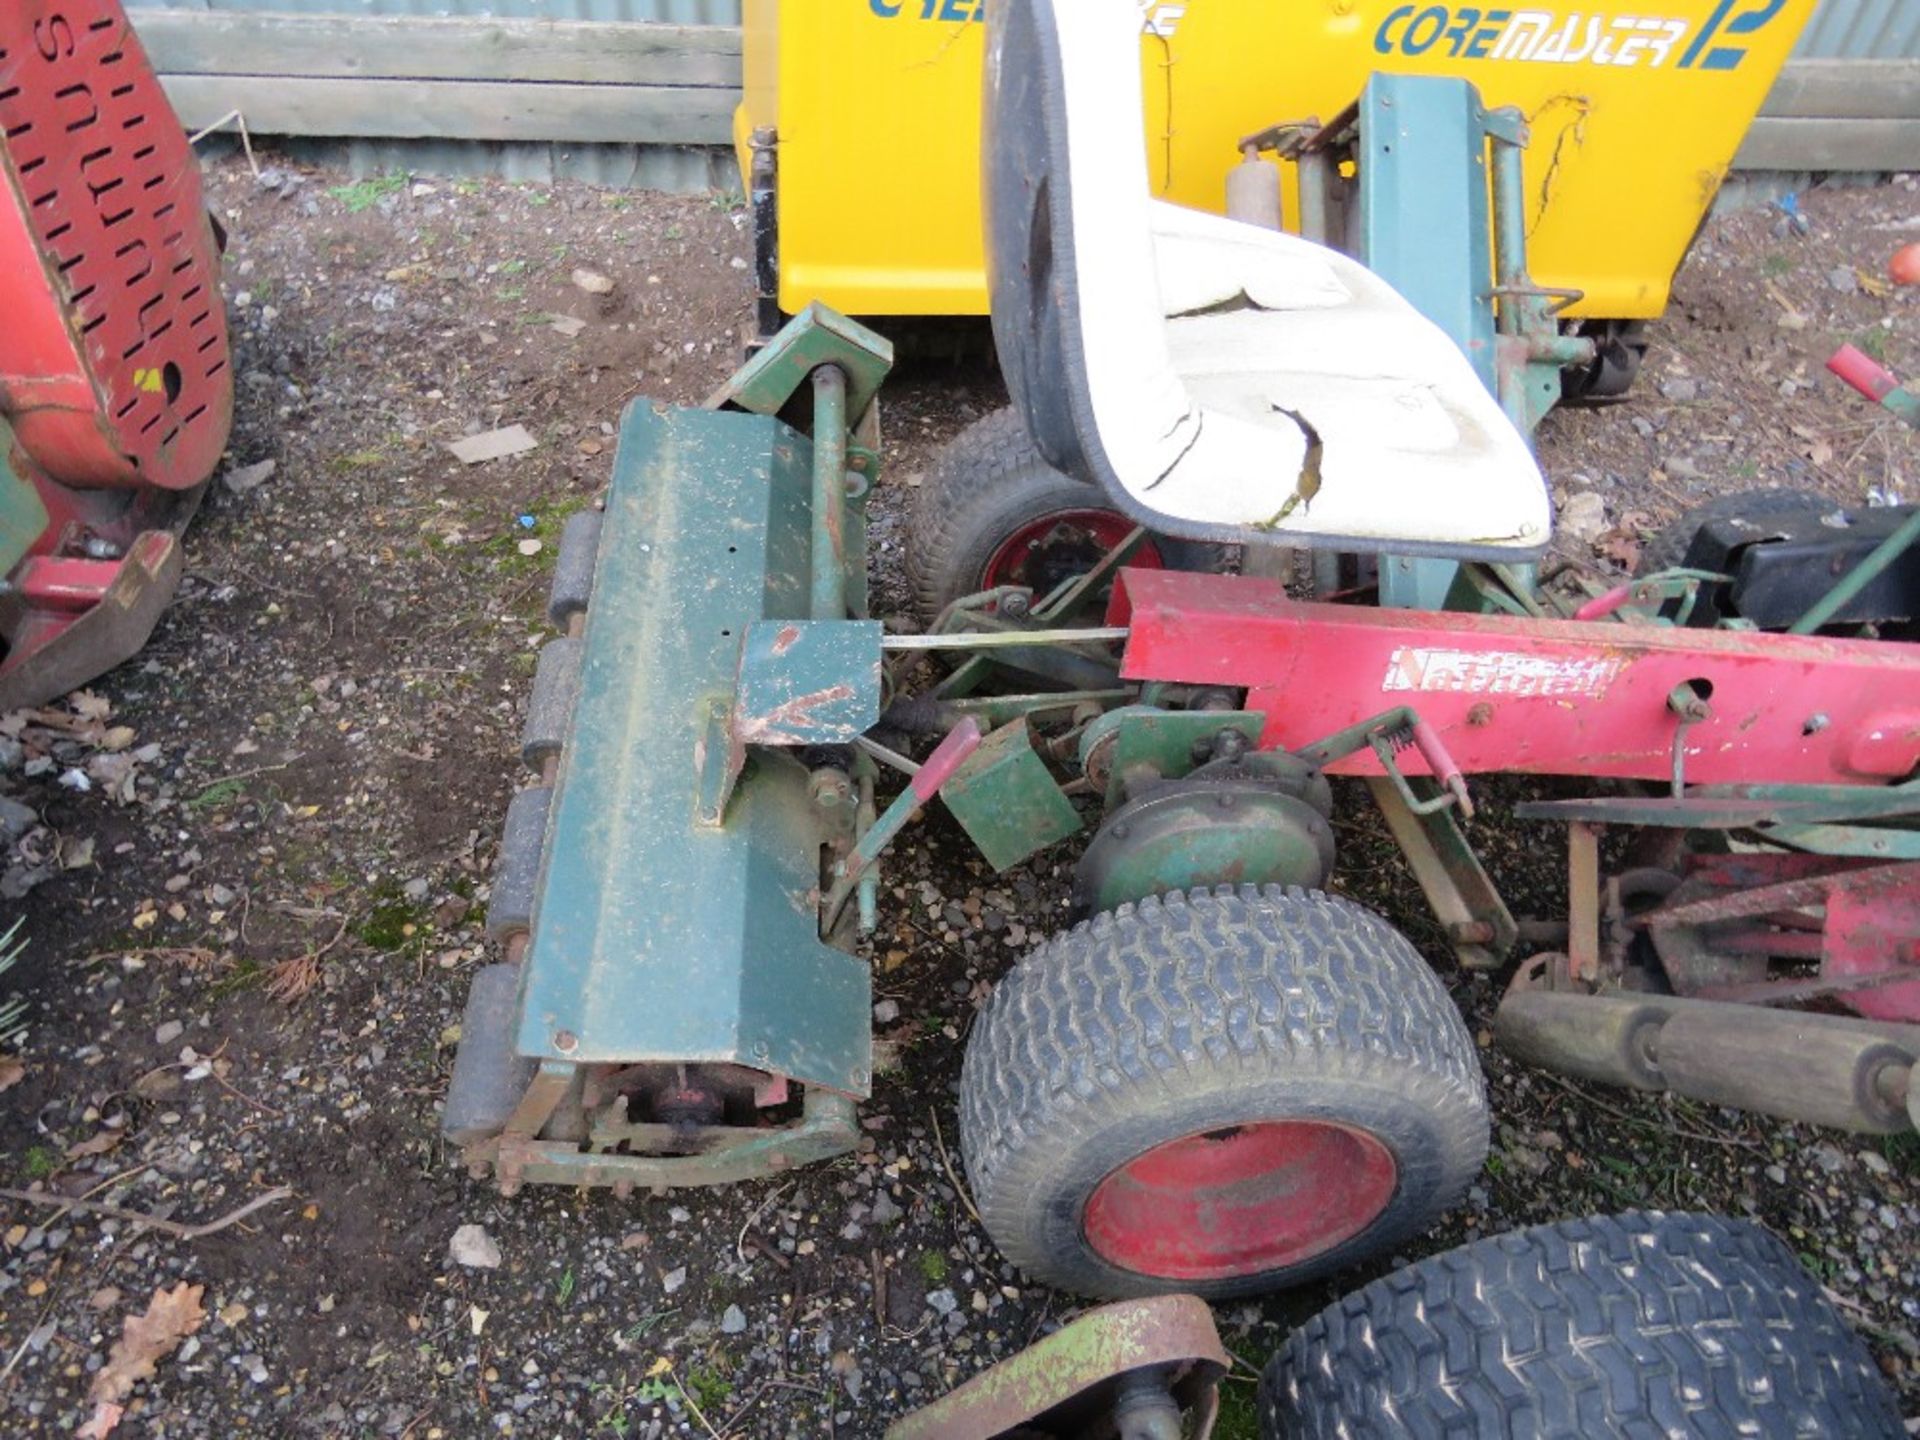 NATIONAL TRIPLE RIDE ON CYLINDER MOWER. NO VAT ON HAMMER PRICE. - Image 3 of 4